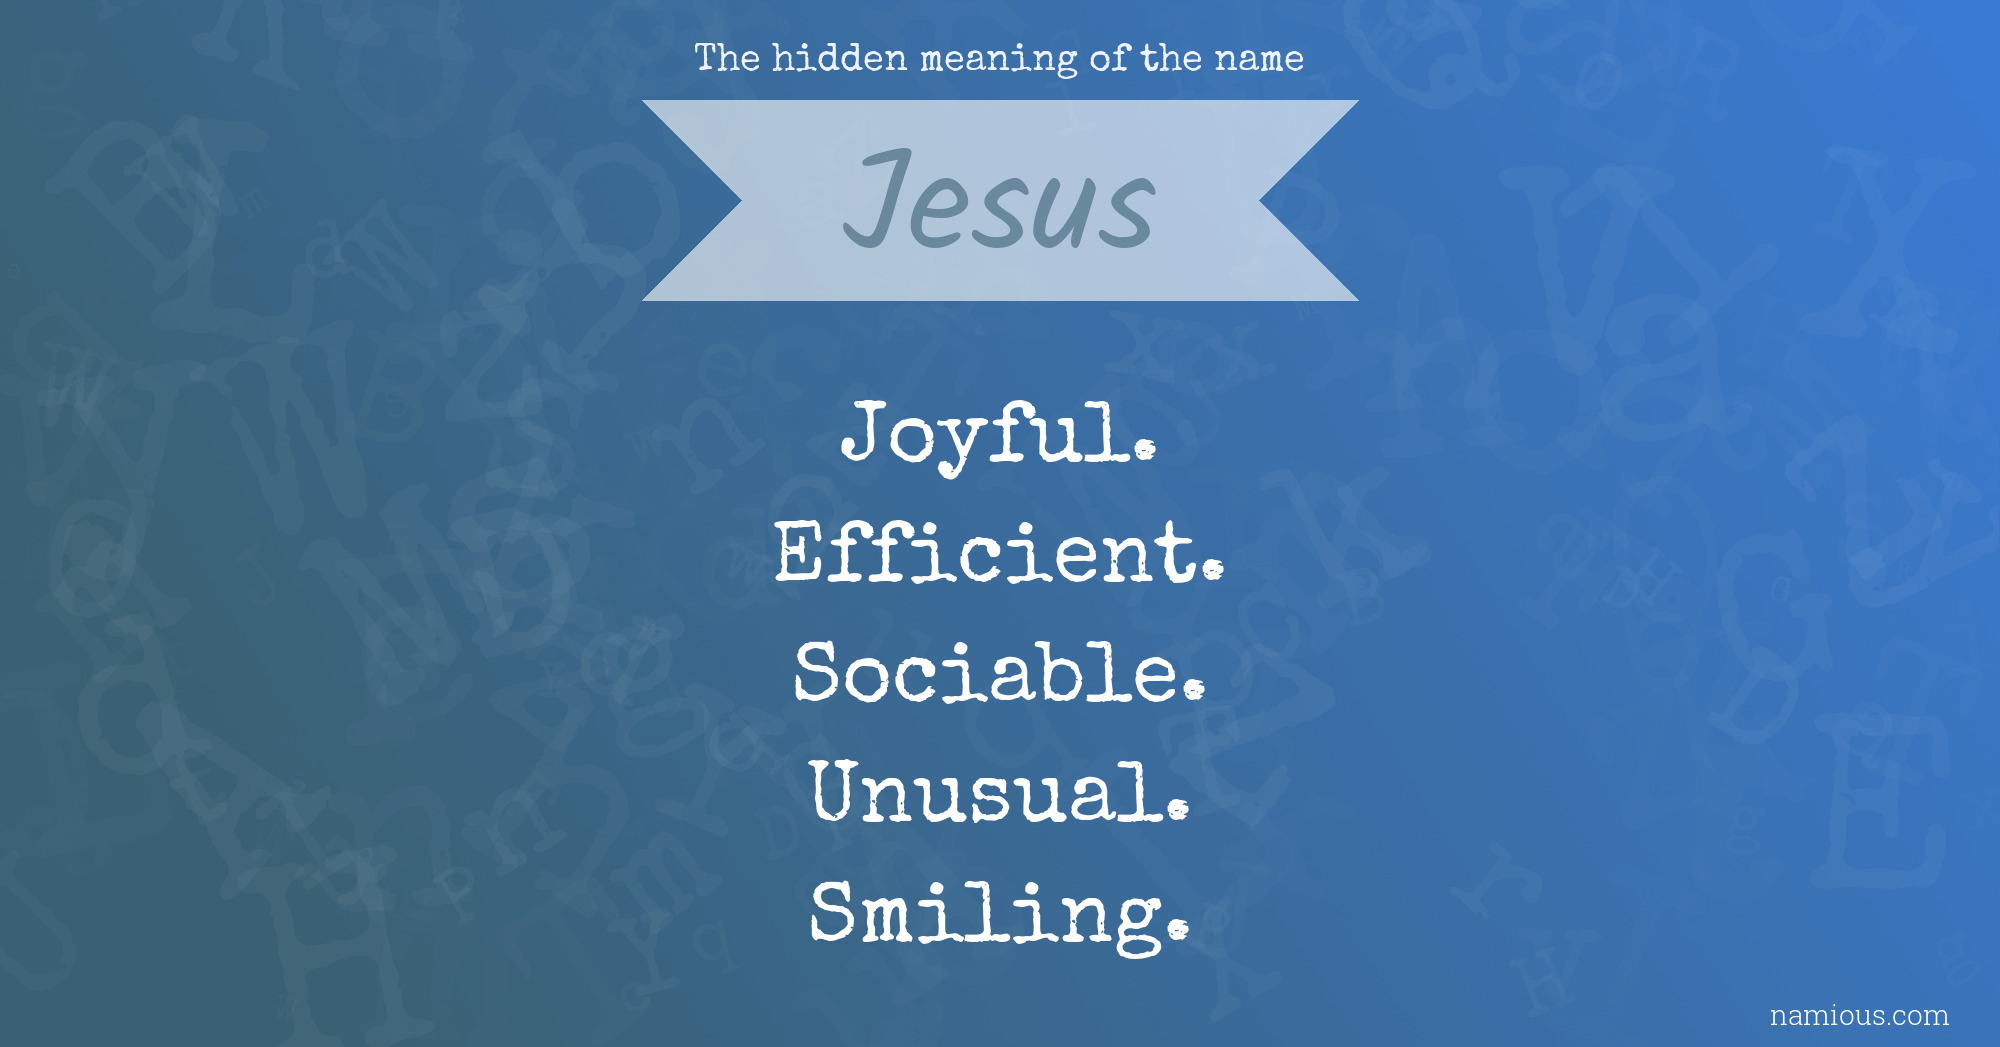 The hidden meaning of the name Jesus